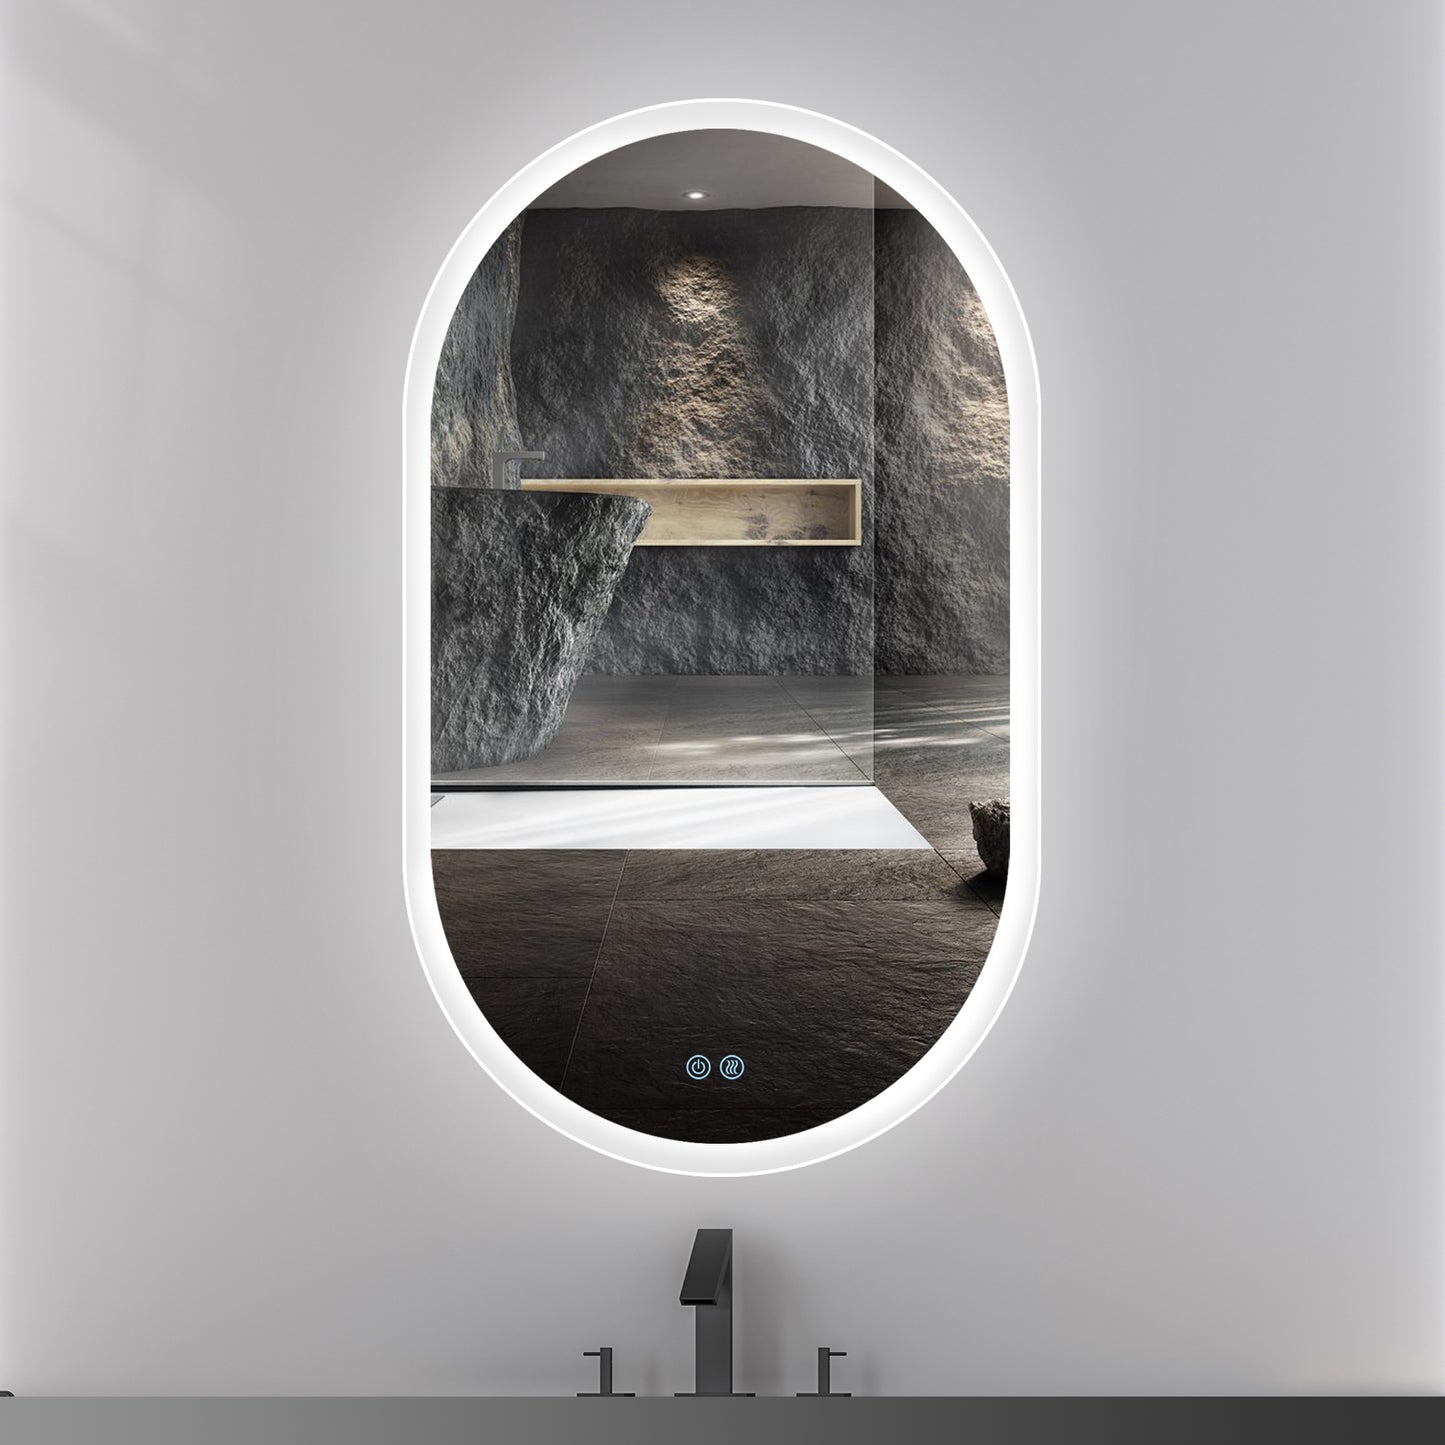 32X20 Inch Bathroom Mirror with Lights, Anti Fog Dimmable LED Mirror for Wall Touch Control, Frameless Oval Smart Vanity Mirror Vertical Hanging